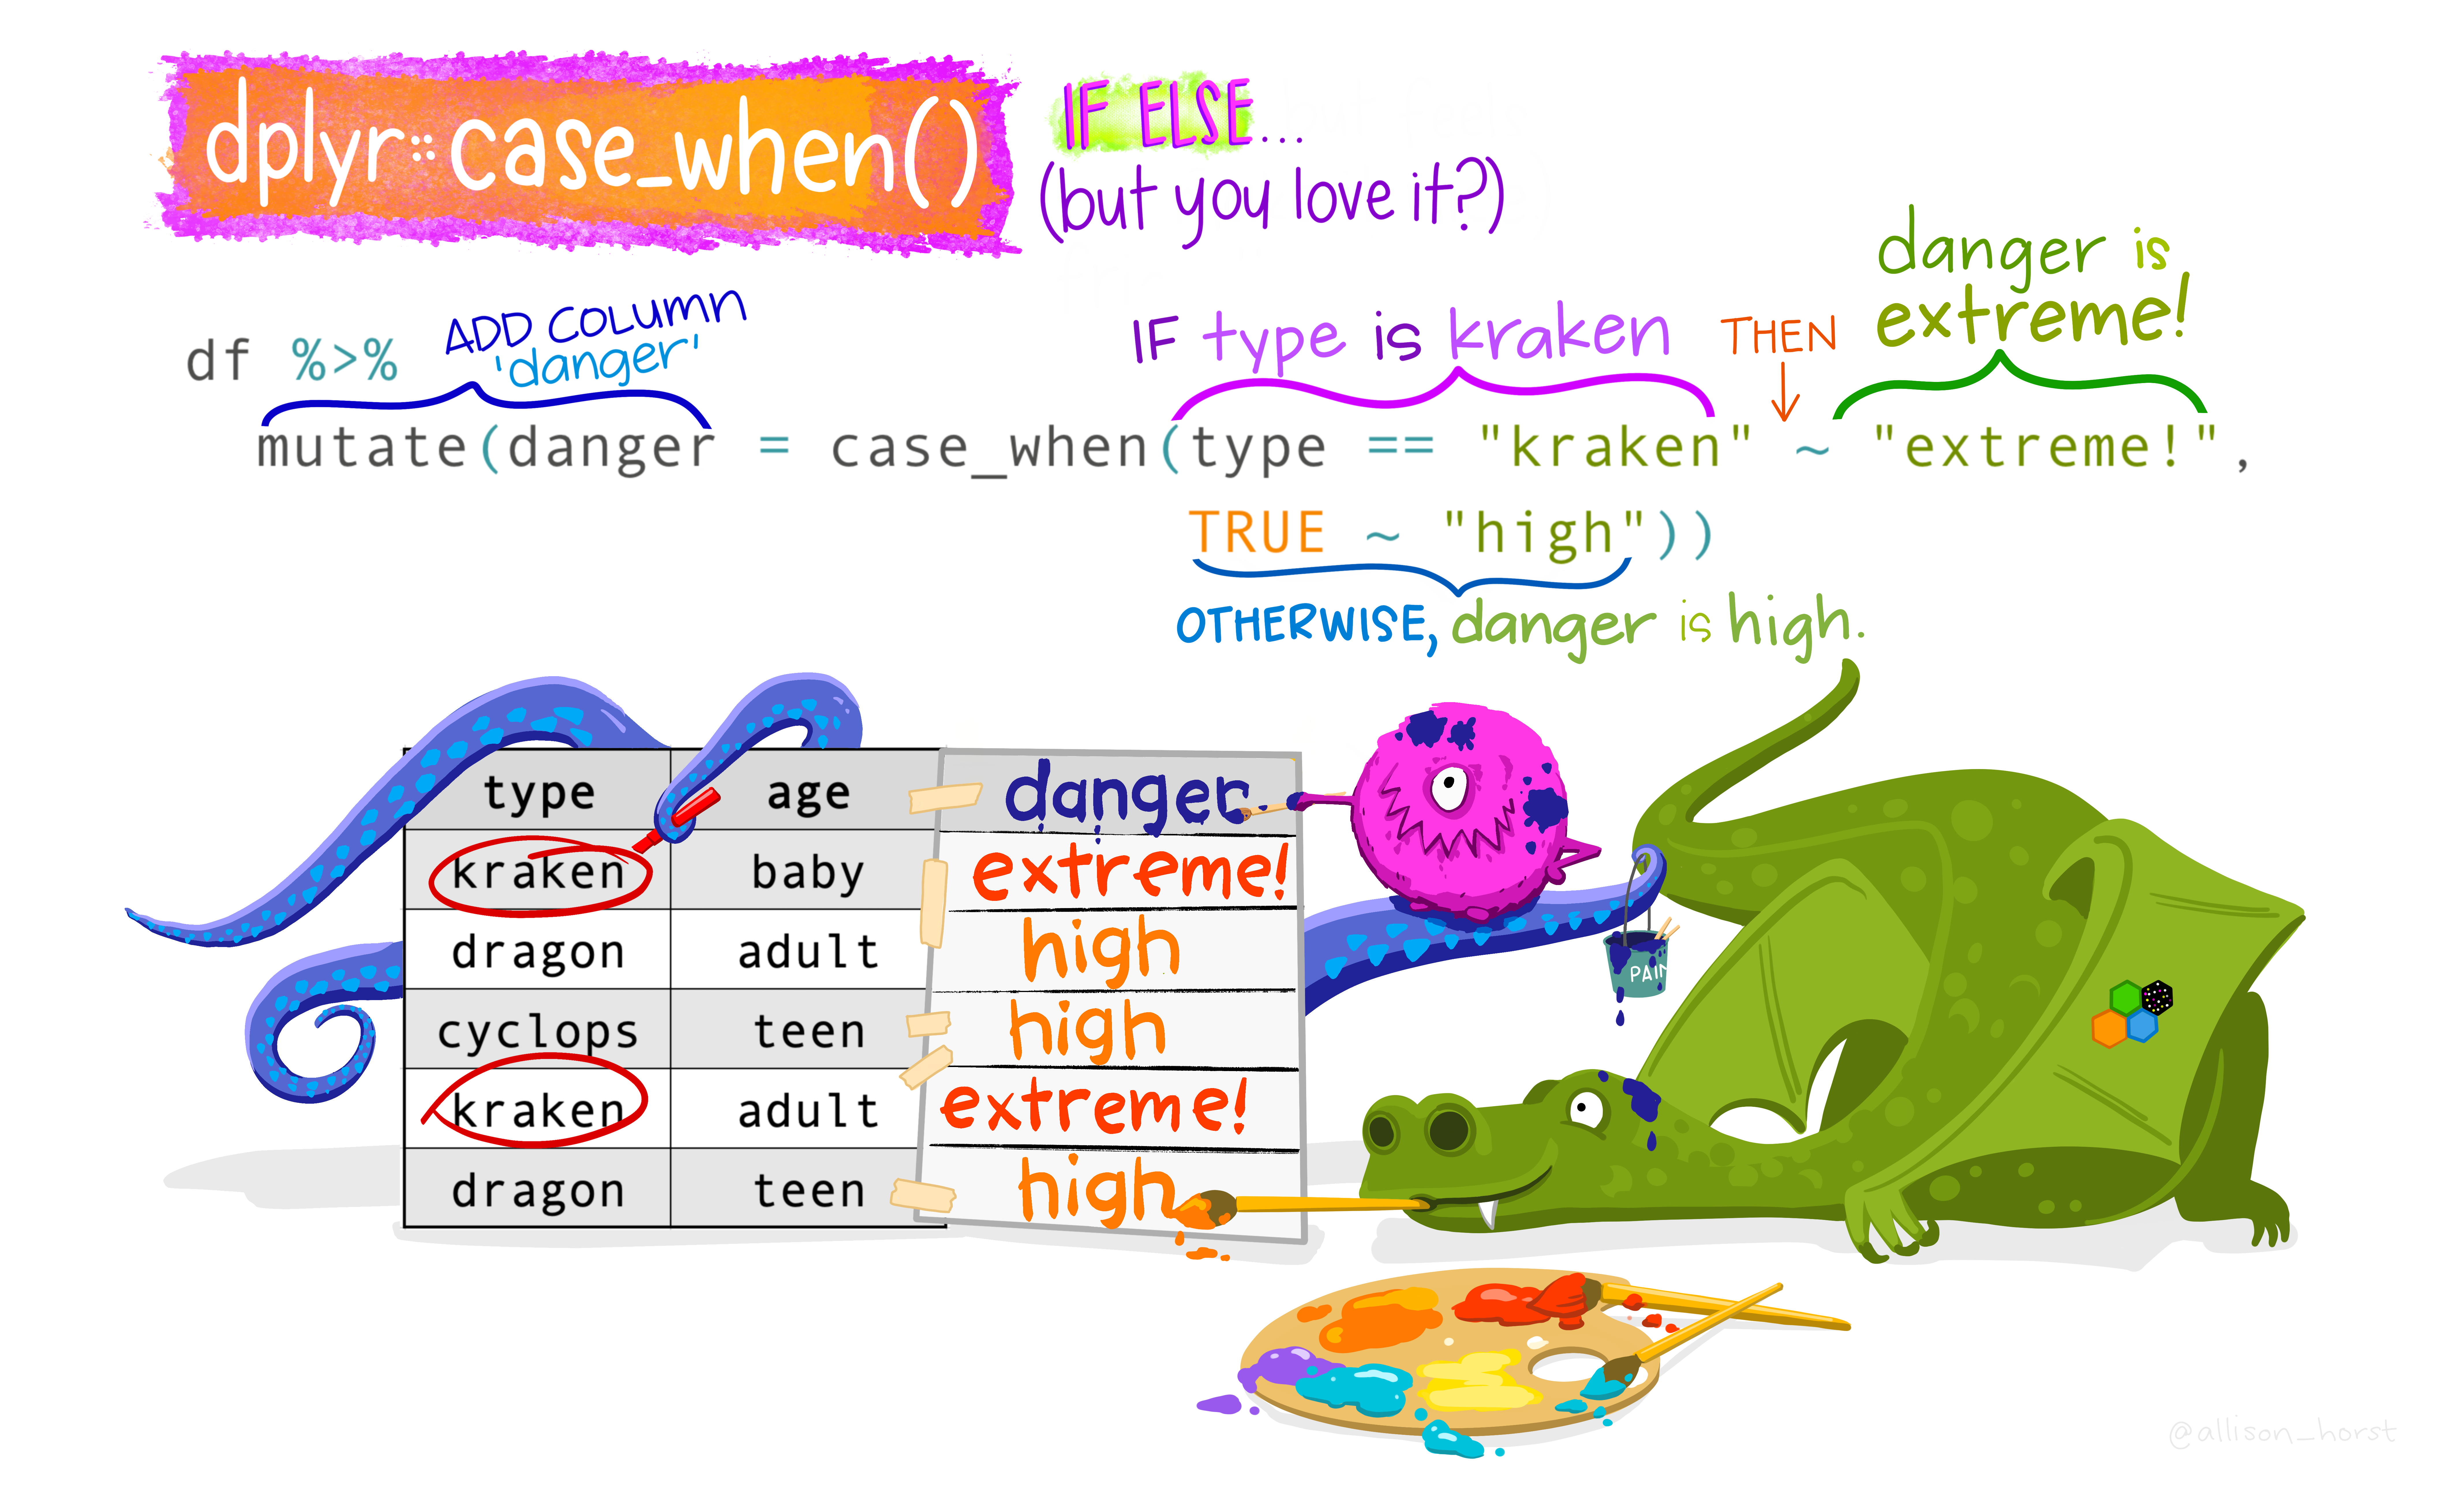 Cartoon showing a table with creature type (kraken, dragon, or cyclops) and age (baby, teen, or adult). The three creatures listed are adding a new column named “danger,” which contains the word “extreme!” if the type is “kraken” or “high” for any other type. Stylized text reads “dplyr::case_when() - IF ELSE...(but you love it?)” An example of code is shown: “mutate(danger = case_when(type == “kraken” ~ “extreme!”, TRUE ~ “high”).”
